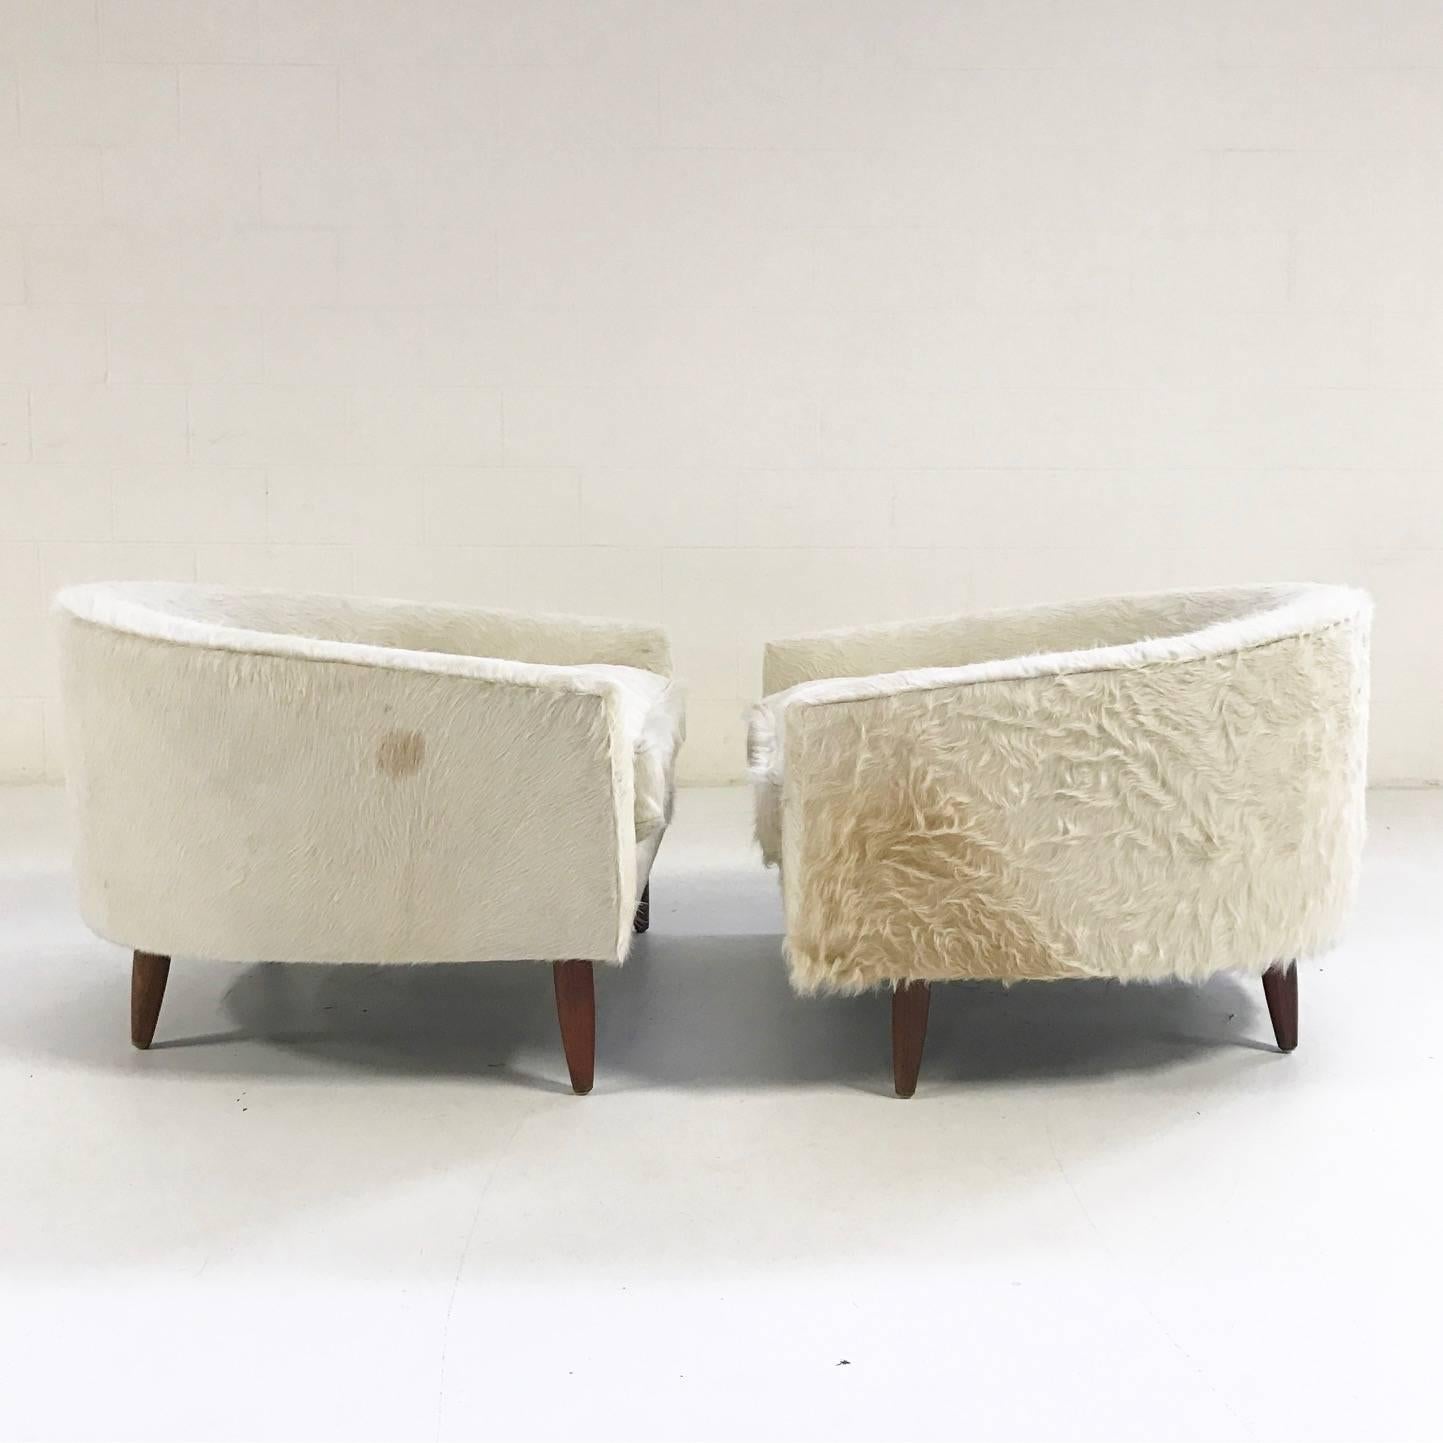 20th Century Pair of Rare Adrian Pearsall Cloud Chairs Restored in Ivory Brazilian Cowhide